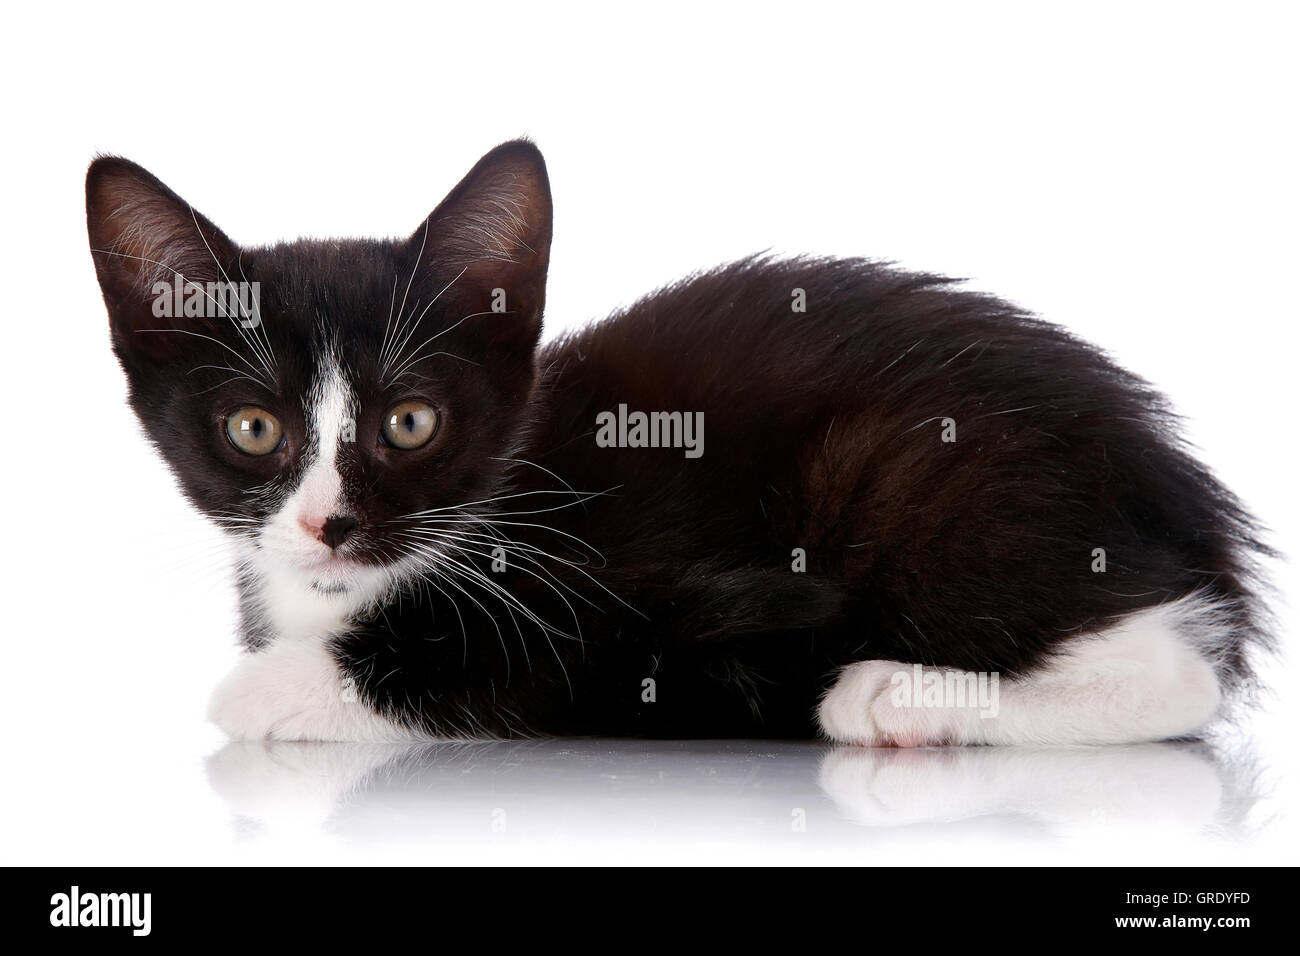 Black and white curious kitten lies on a white background. Stock Photo